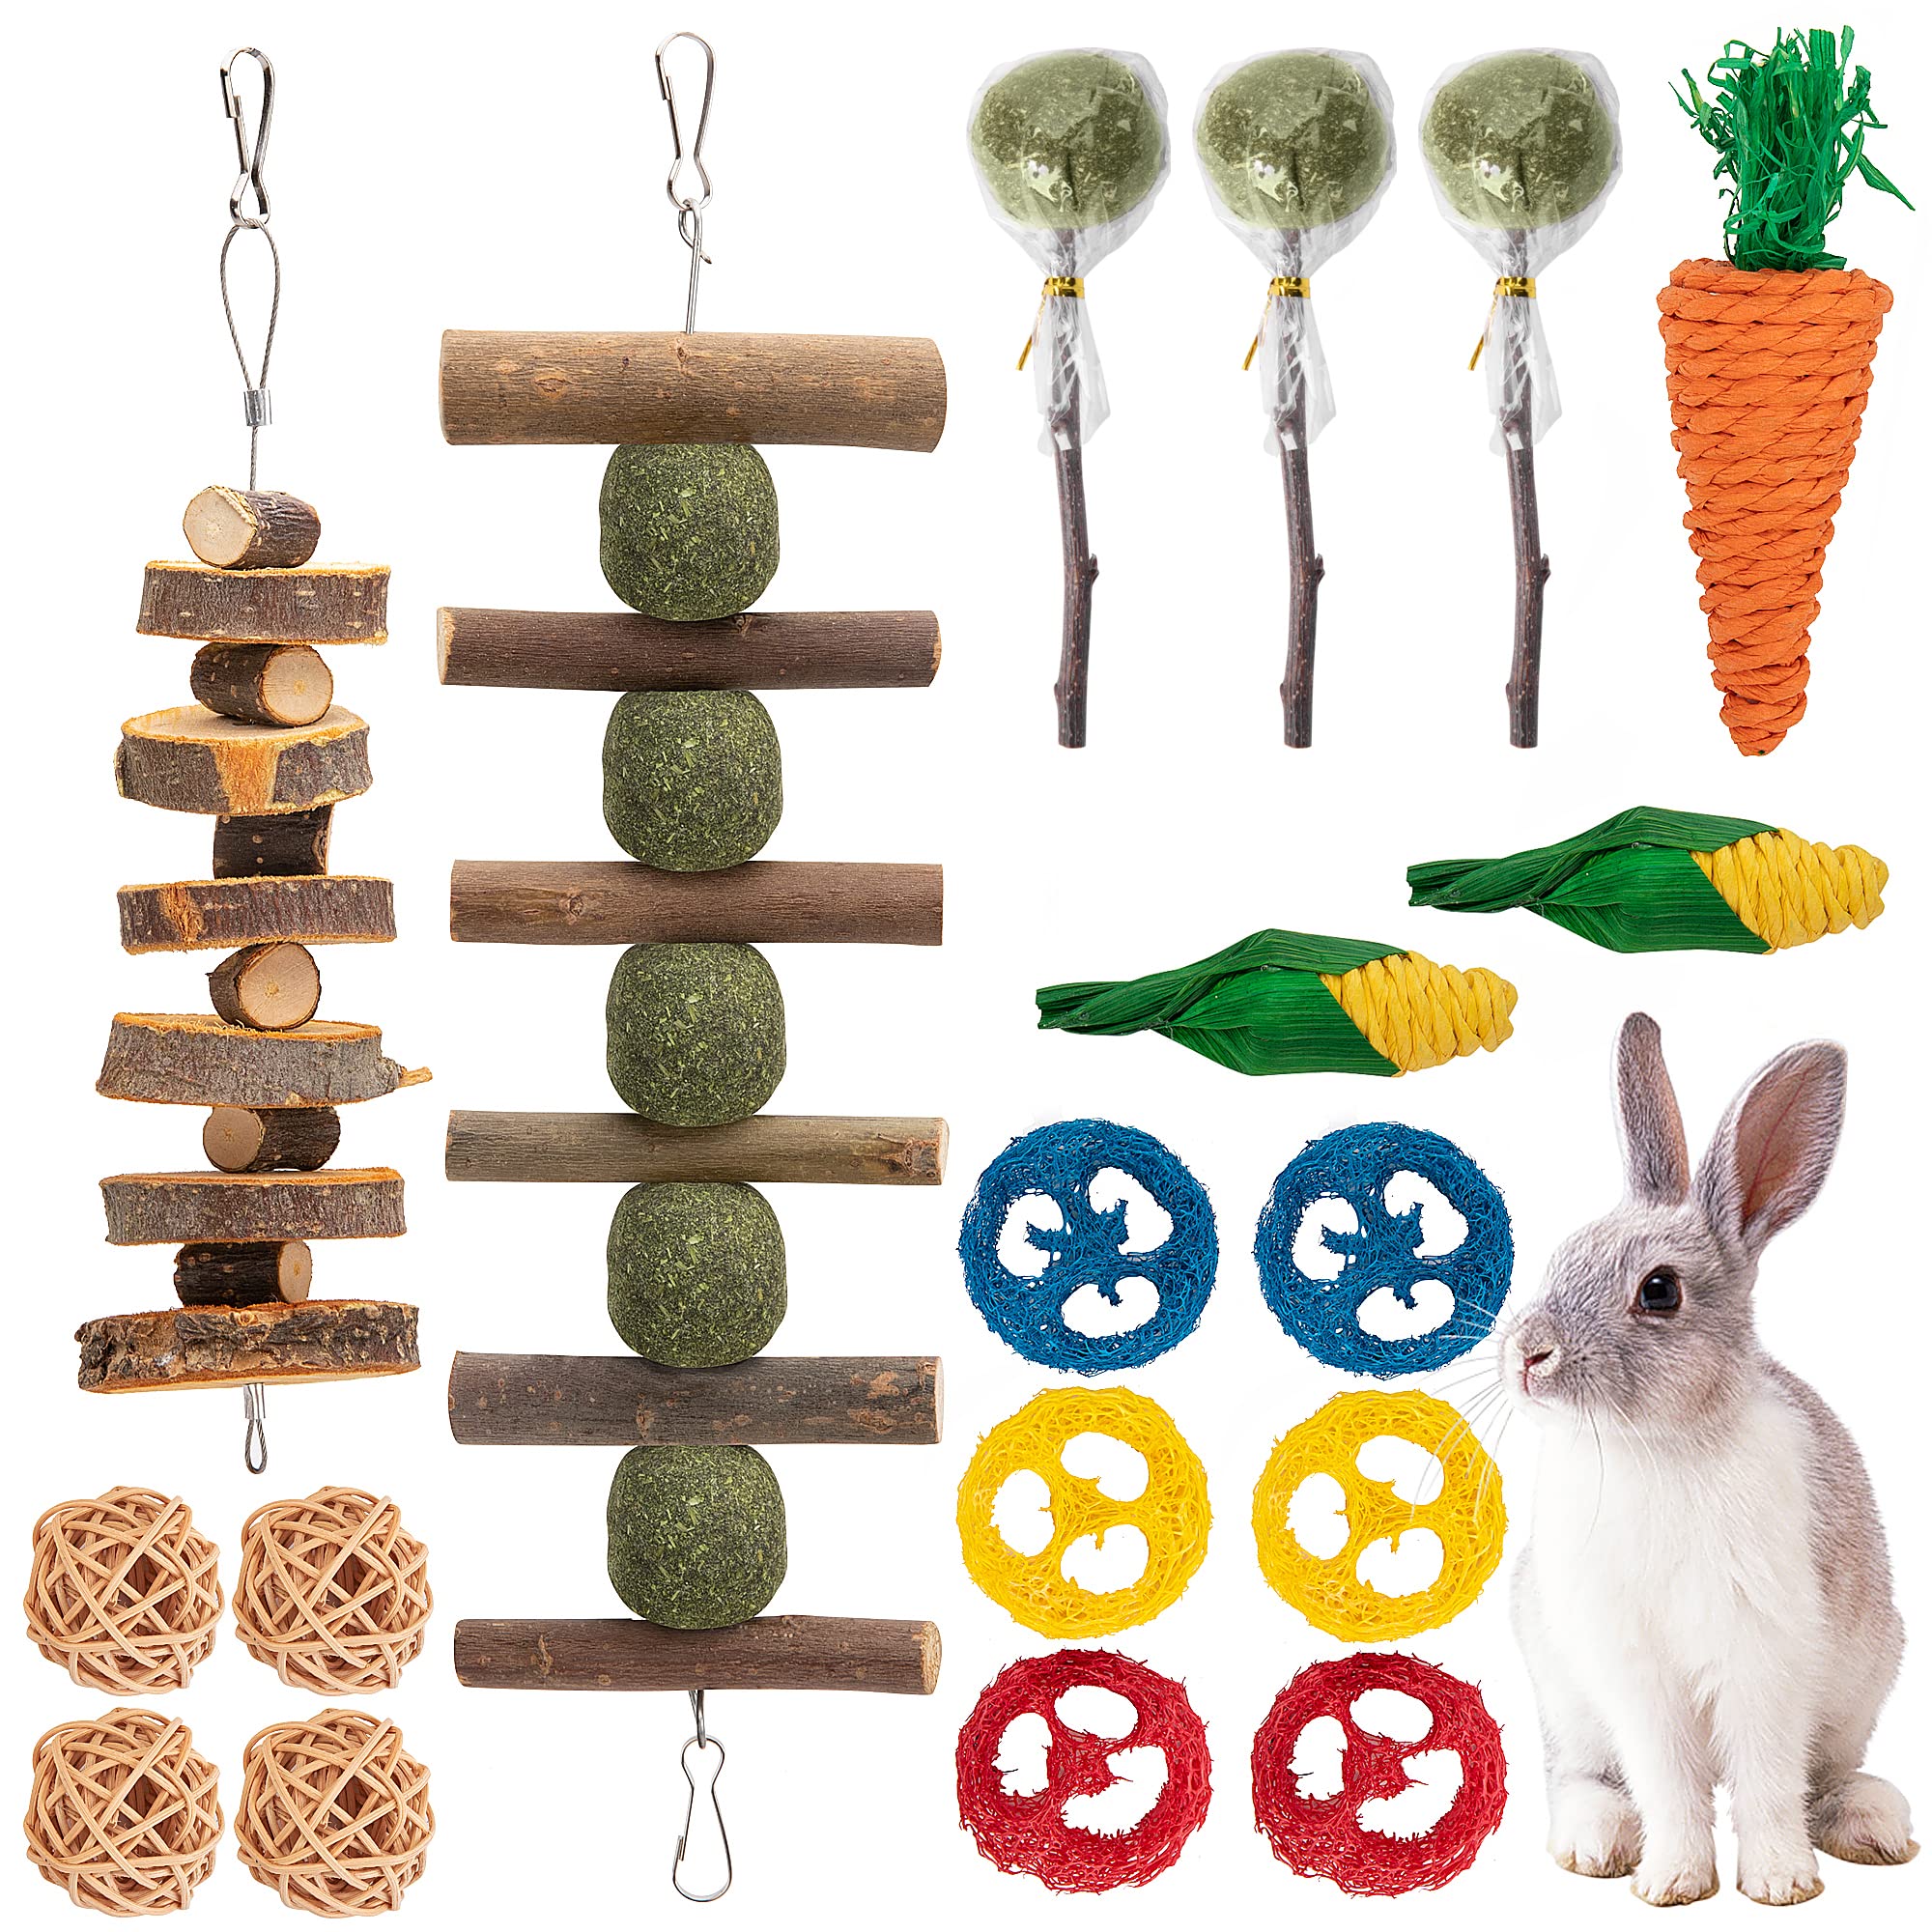 Rabbit Chew Toys, Hamster Chew Toys Set, Natural Bunny Chew Toys, Small  Pets Teeth Care Molar Exercise Bunny Toys for Rabbits, Guinea Pig, Hamster  and